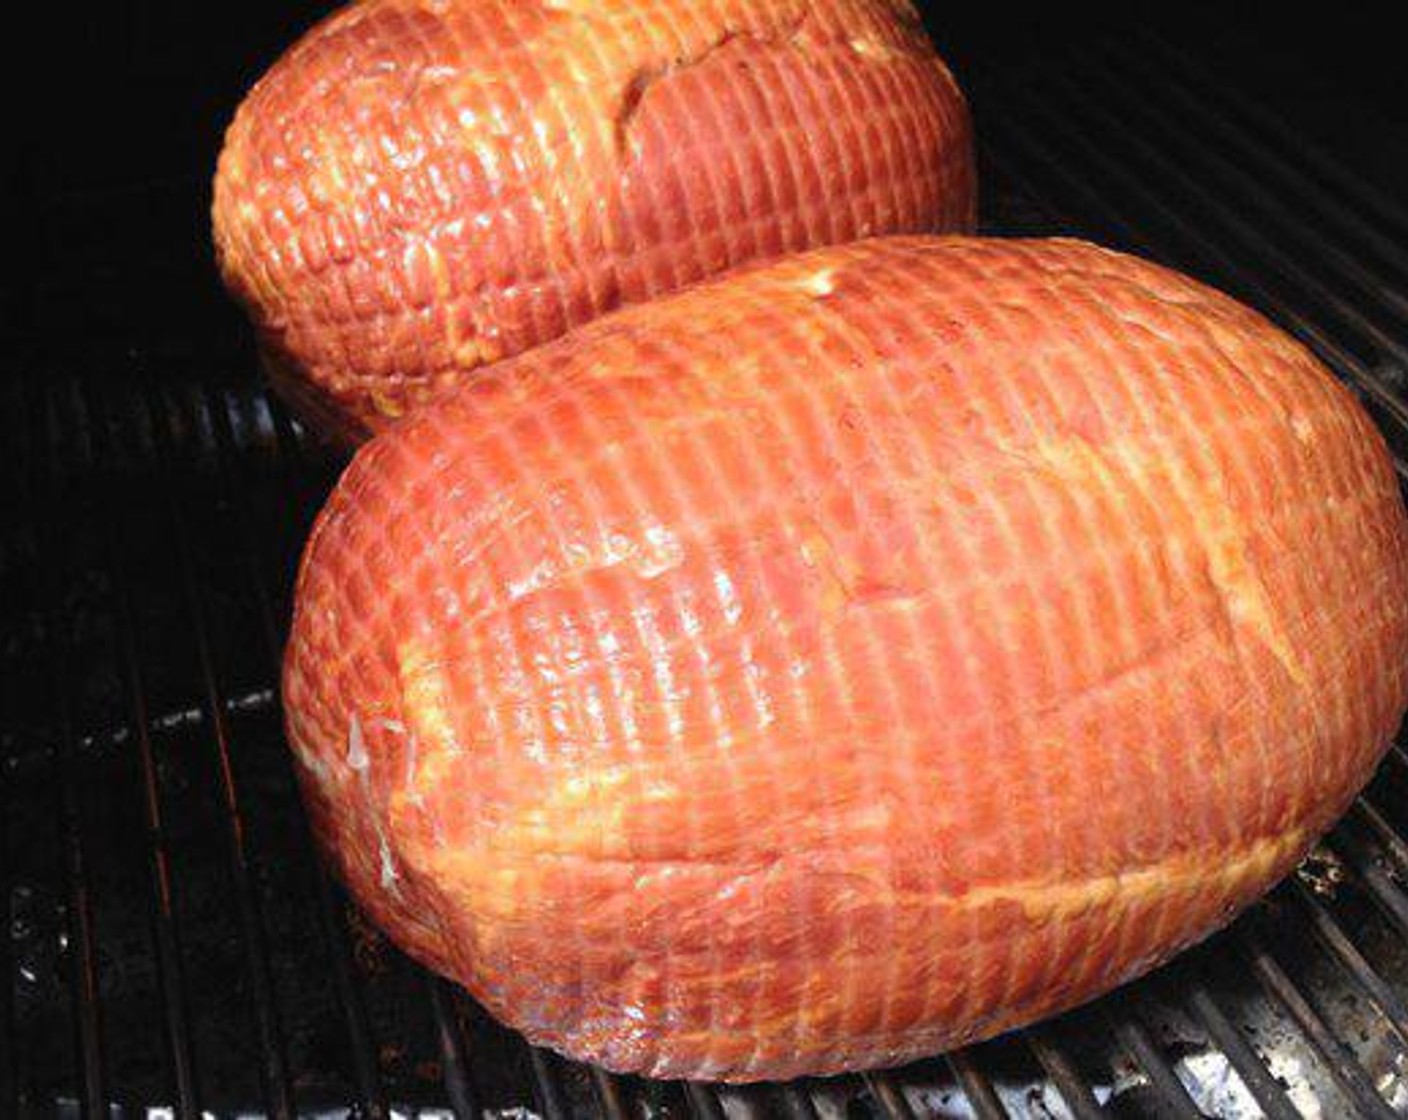 step 1 Setup smoker or grill for indirect heat and set it to hold a steady 275 degrees F (140 degrees C). Remove the Cooked Pit Ham (8 lb) from the packaging and place it on the smoker.